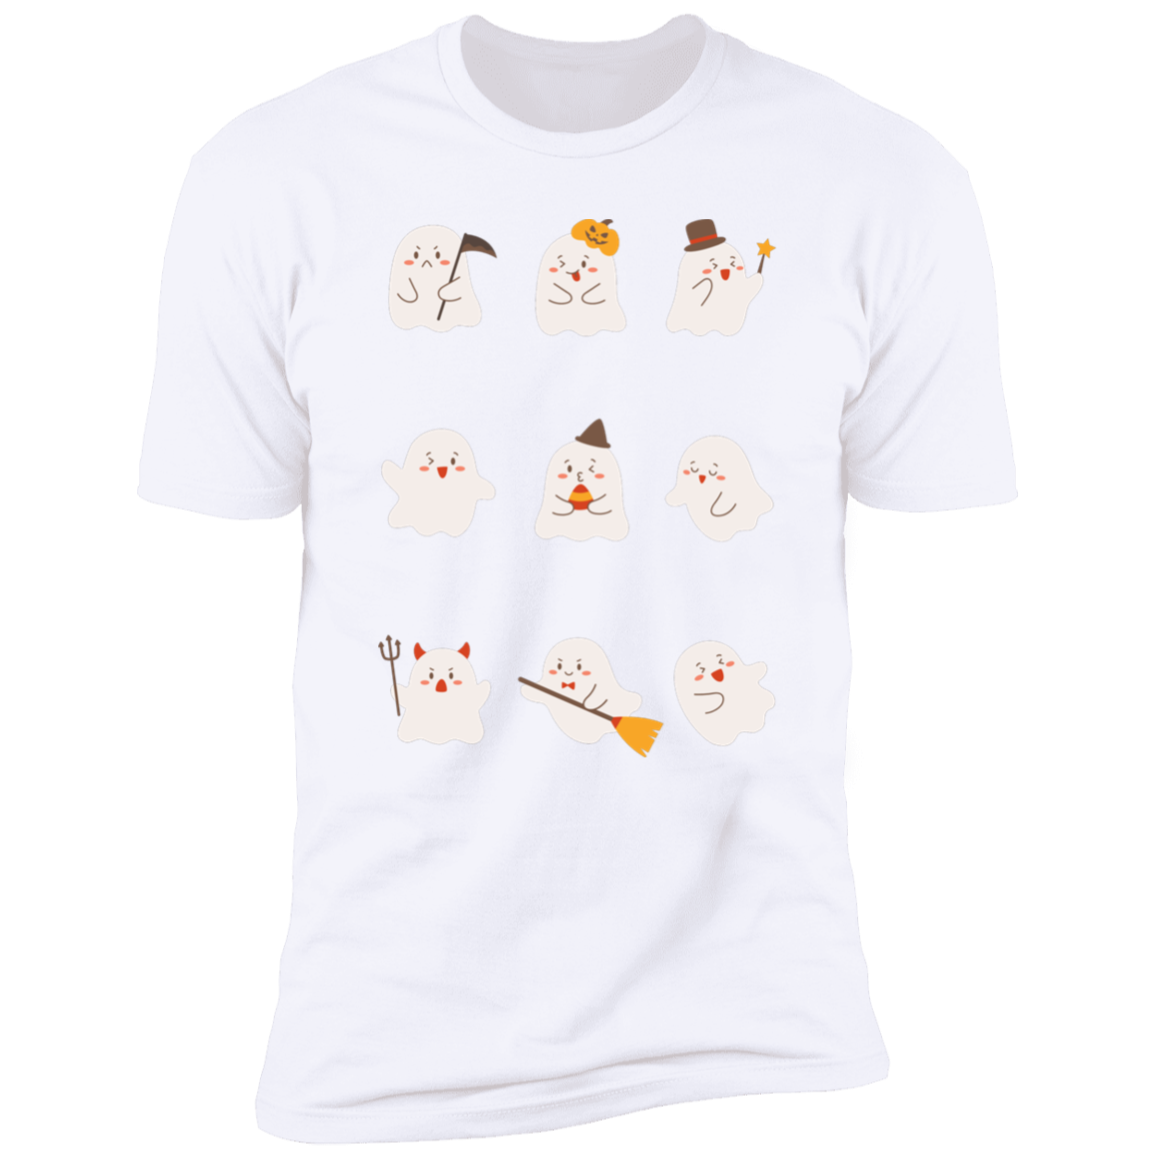 Get trendy with 9 boos Premium Short Sleeve Tee - T-Shirts available at Good Gift Company. Grab yours for $15.95 today!